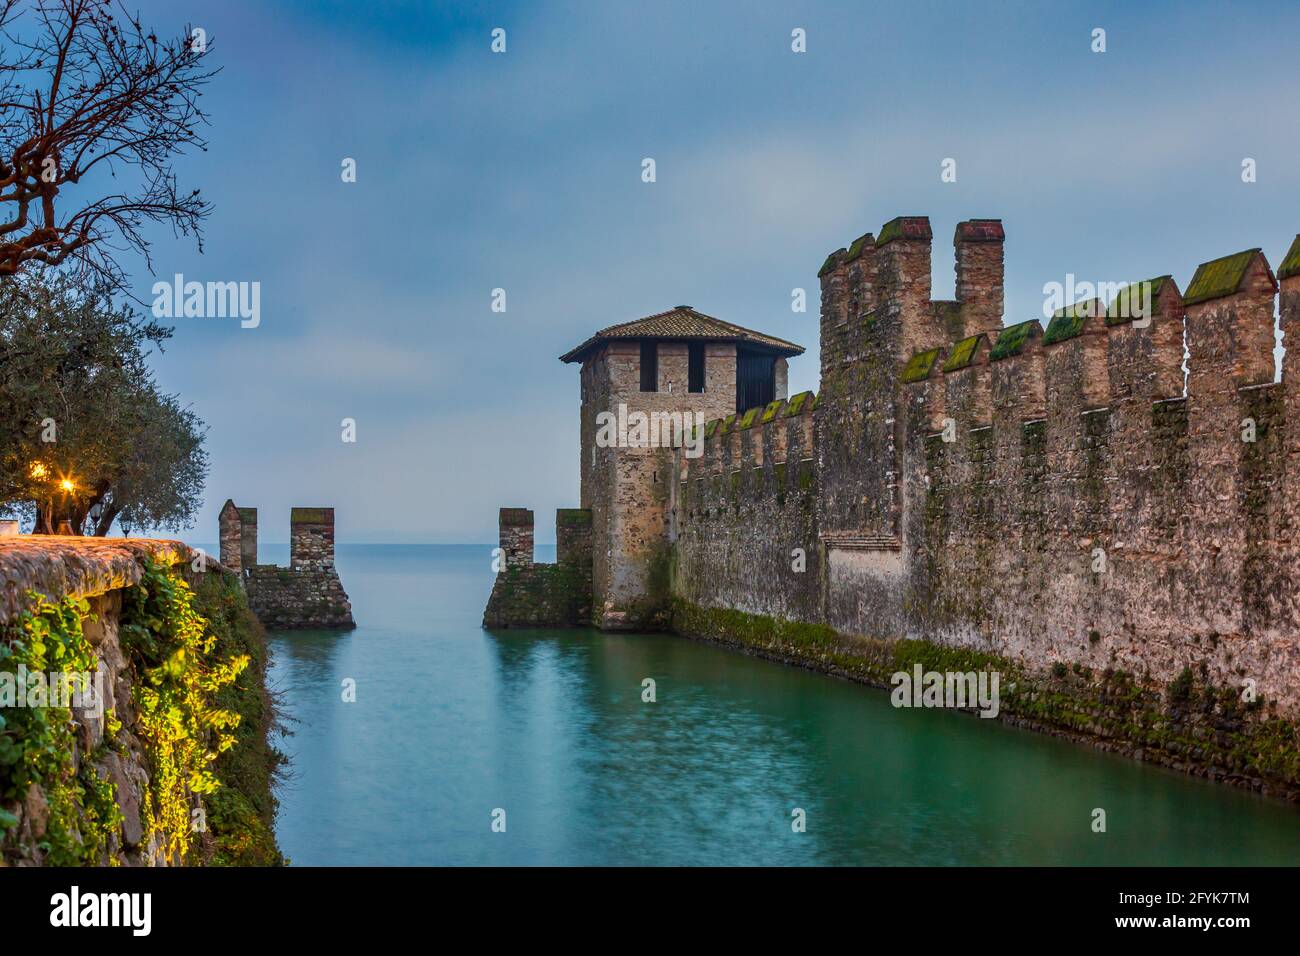 The castle in the Lake, Scaliger Castle, in Sirmione at Lake Garda. Stock Photo